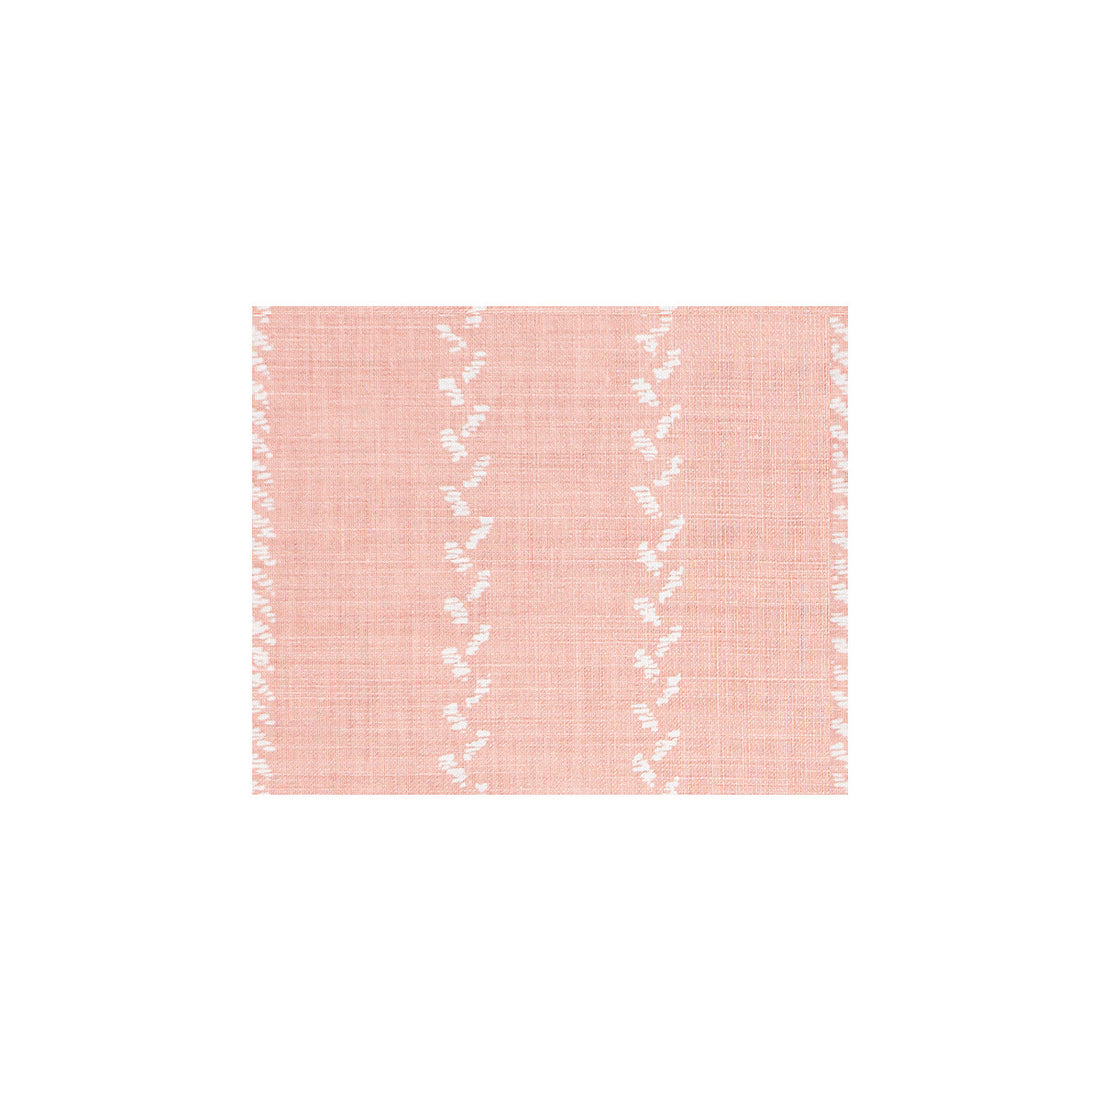 Pelham Stripe fabric in pink color - pattern BFC-3507.17.0 - by Lee Jofa in the Blithfield collection